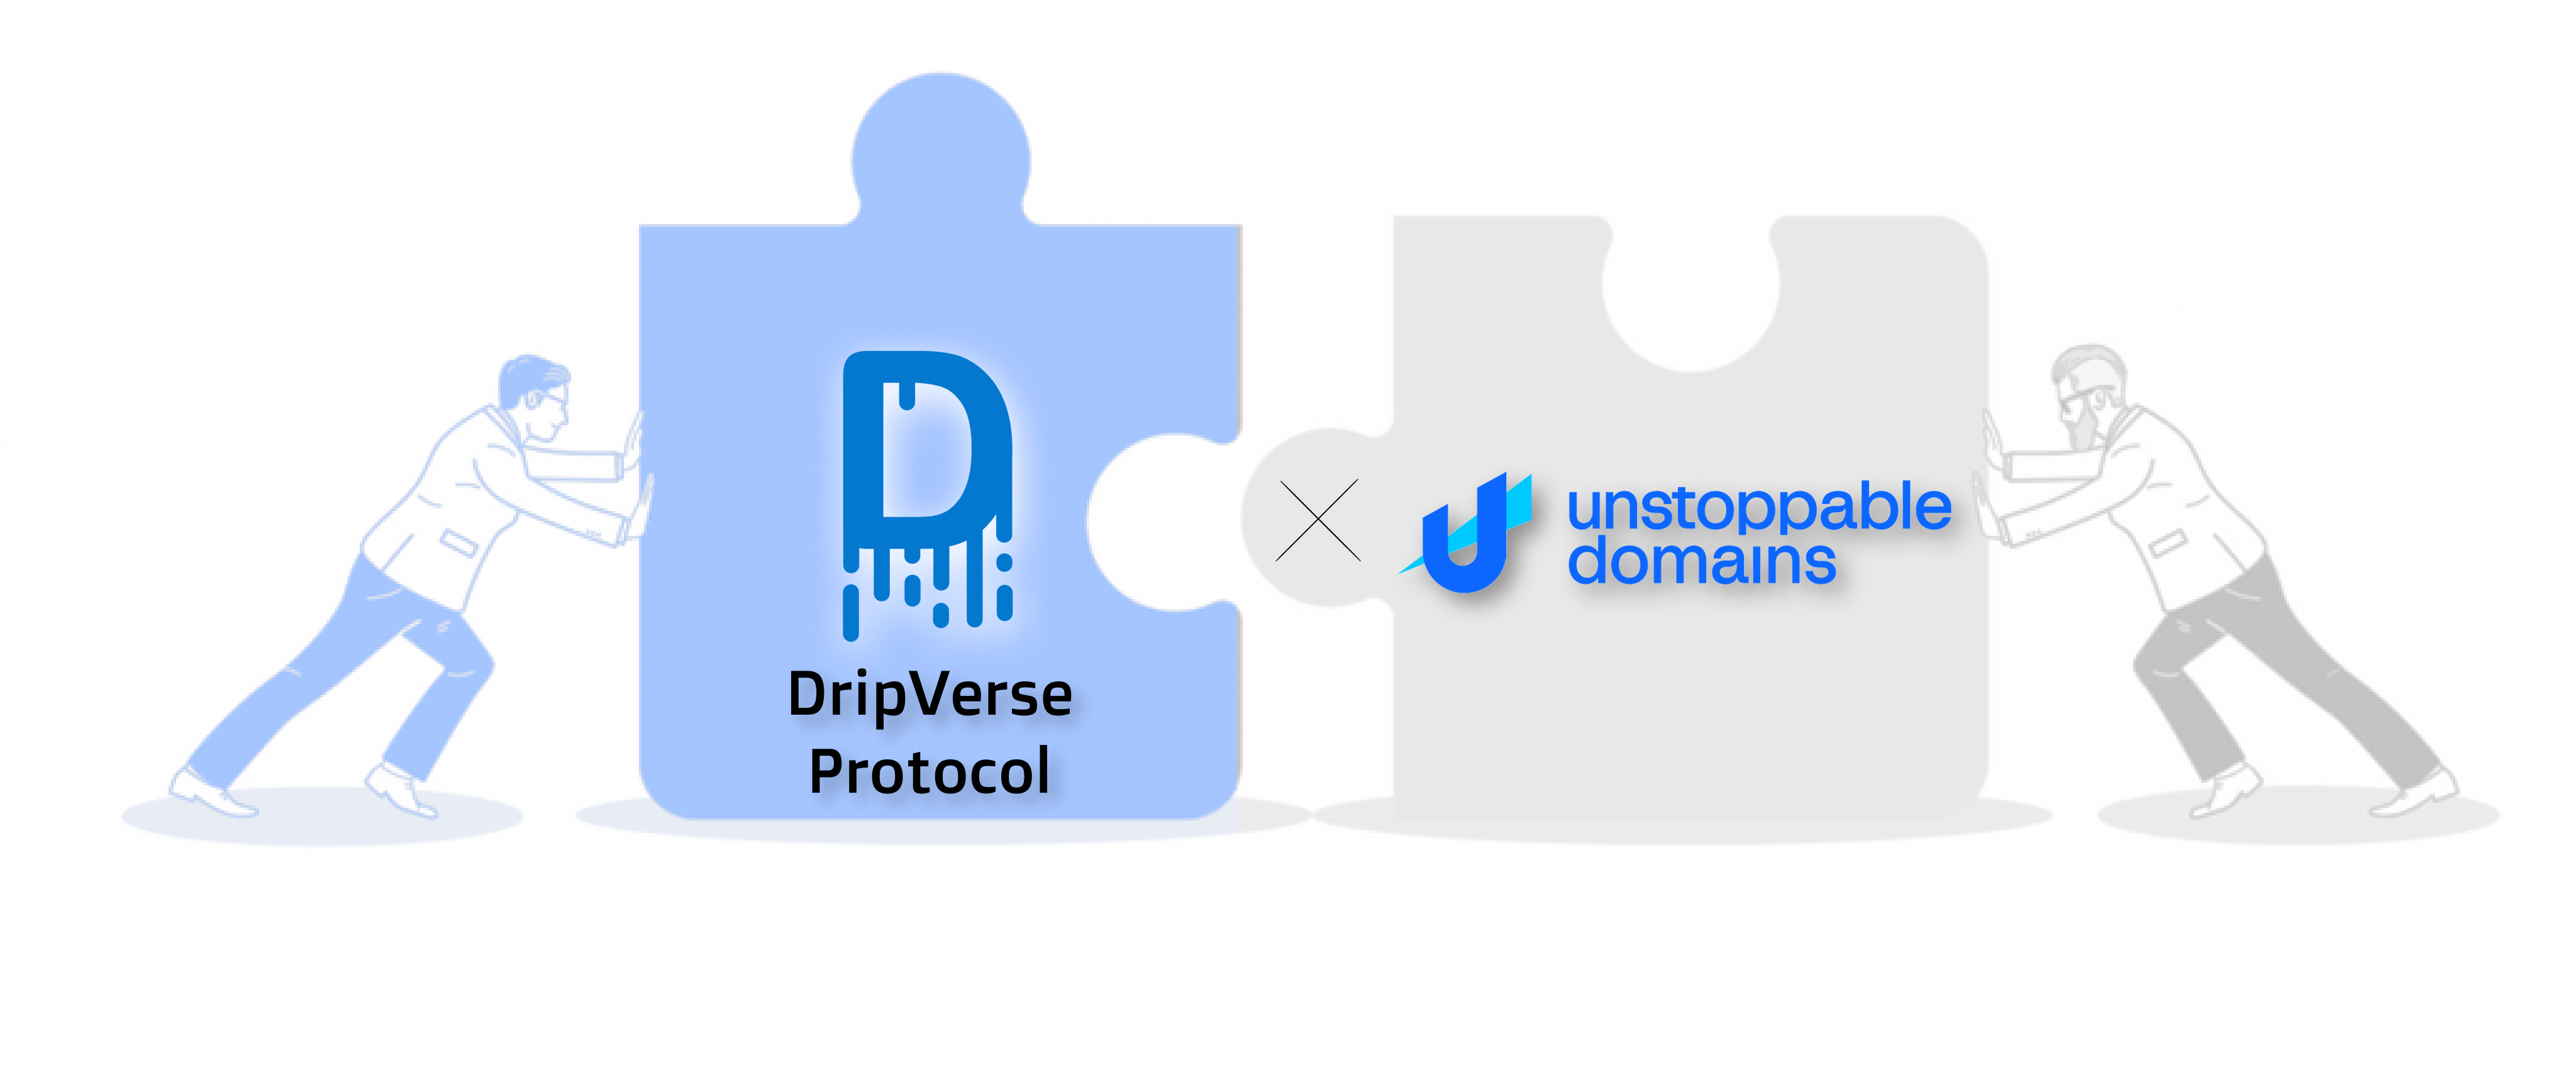 DripVerse Protocol partners with Unstoppable Domains